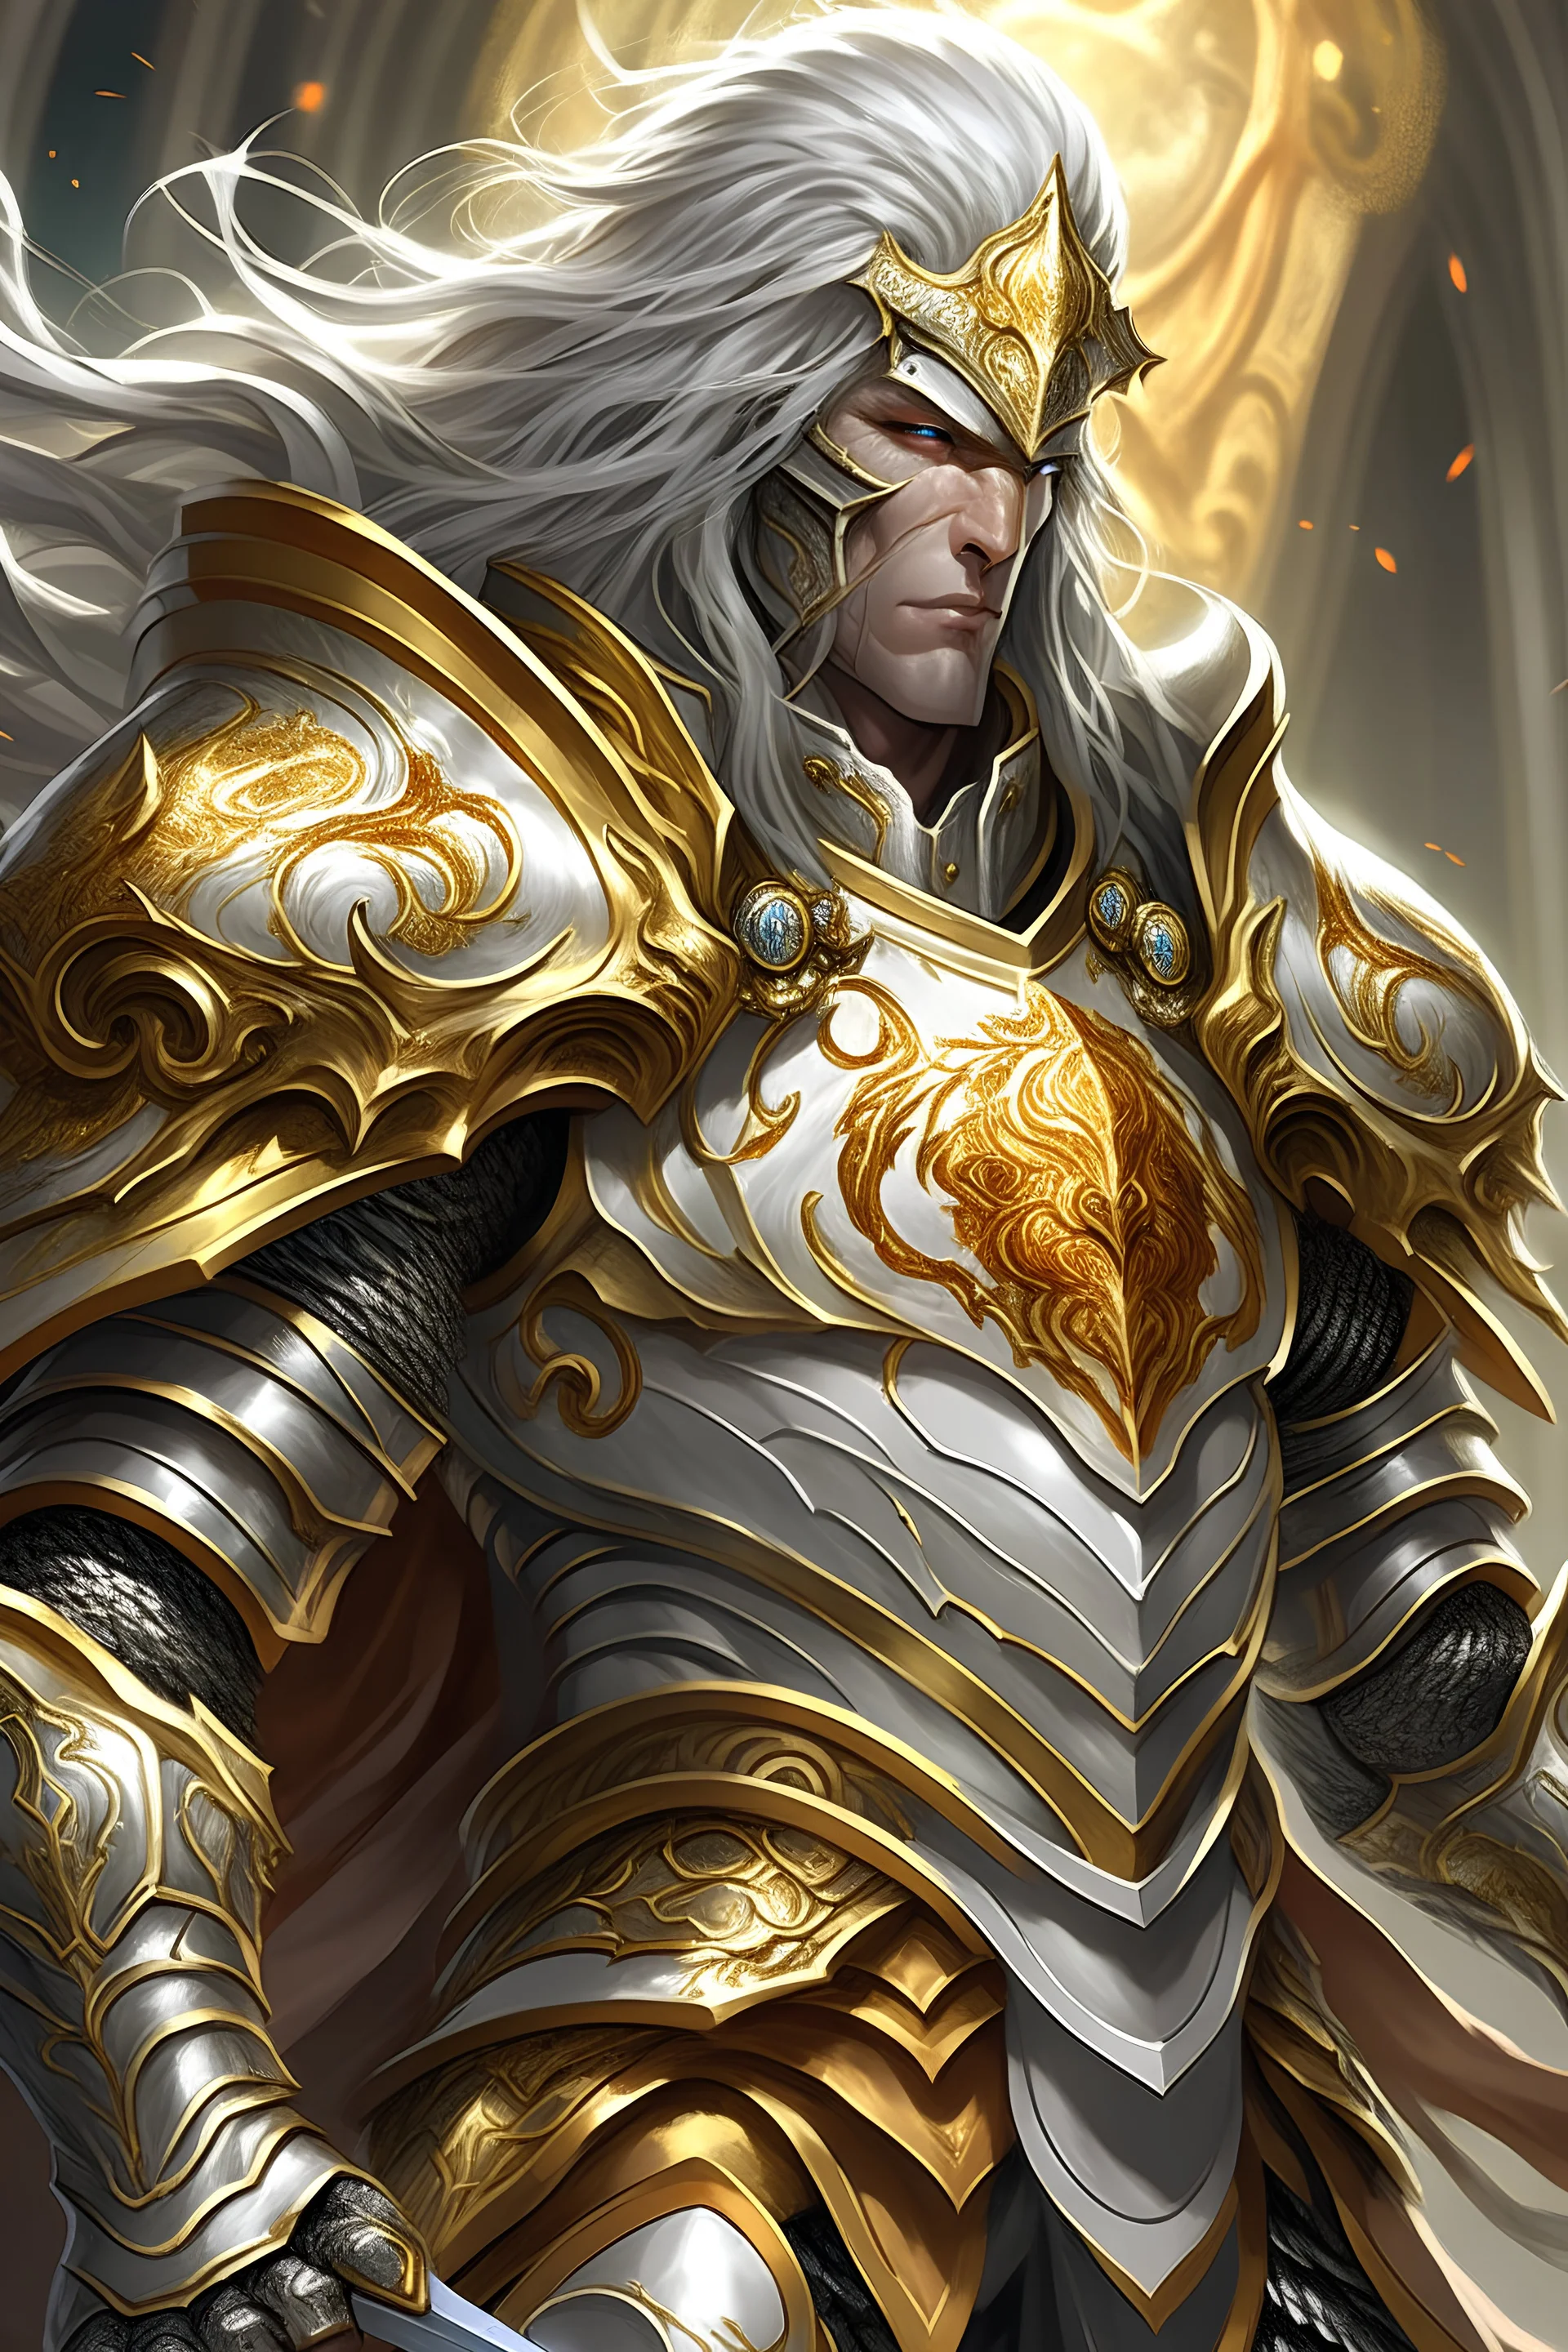 In the image, a mighty paladin stands tall, adorned in gleaming silver armor with intricate gold engravings. The armor is both regal and functional, providing protection while exuding an aura of righteousness. The paladin's face is stern, framed by a flowing mane of golden hair, and their eyes radiate a sense of unwavering determination. Clutched in one hand is a finely crafted pistol, its barrel adorned with sacred symbols. The pistol itself appears to be a blend of traditional craftsmanship a